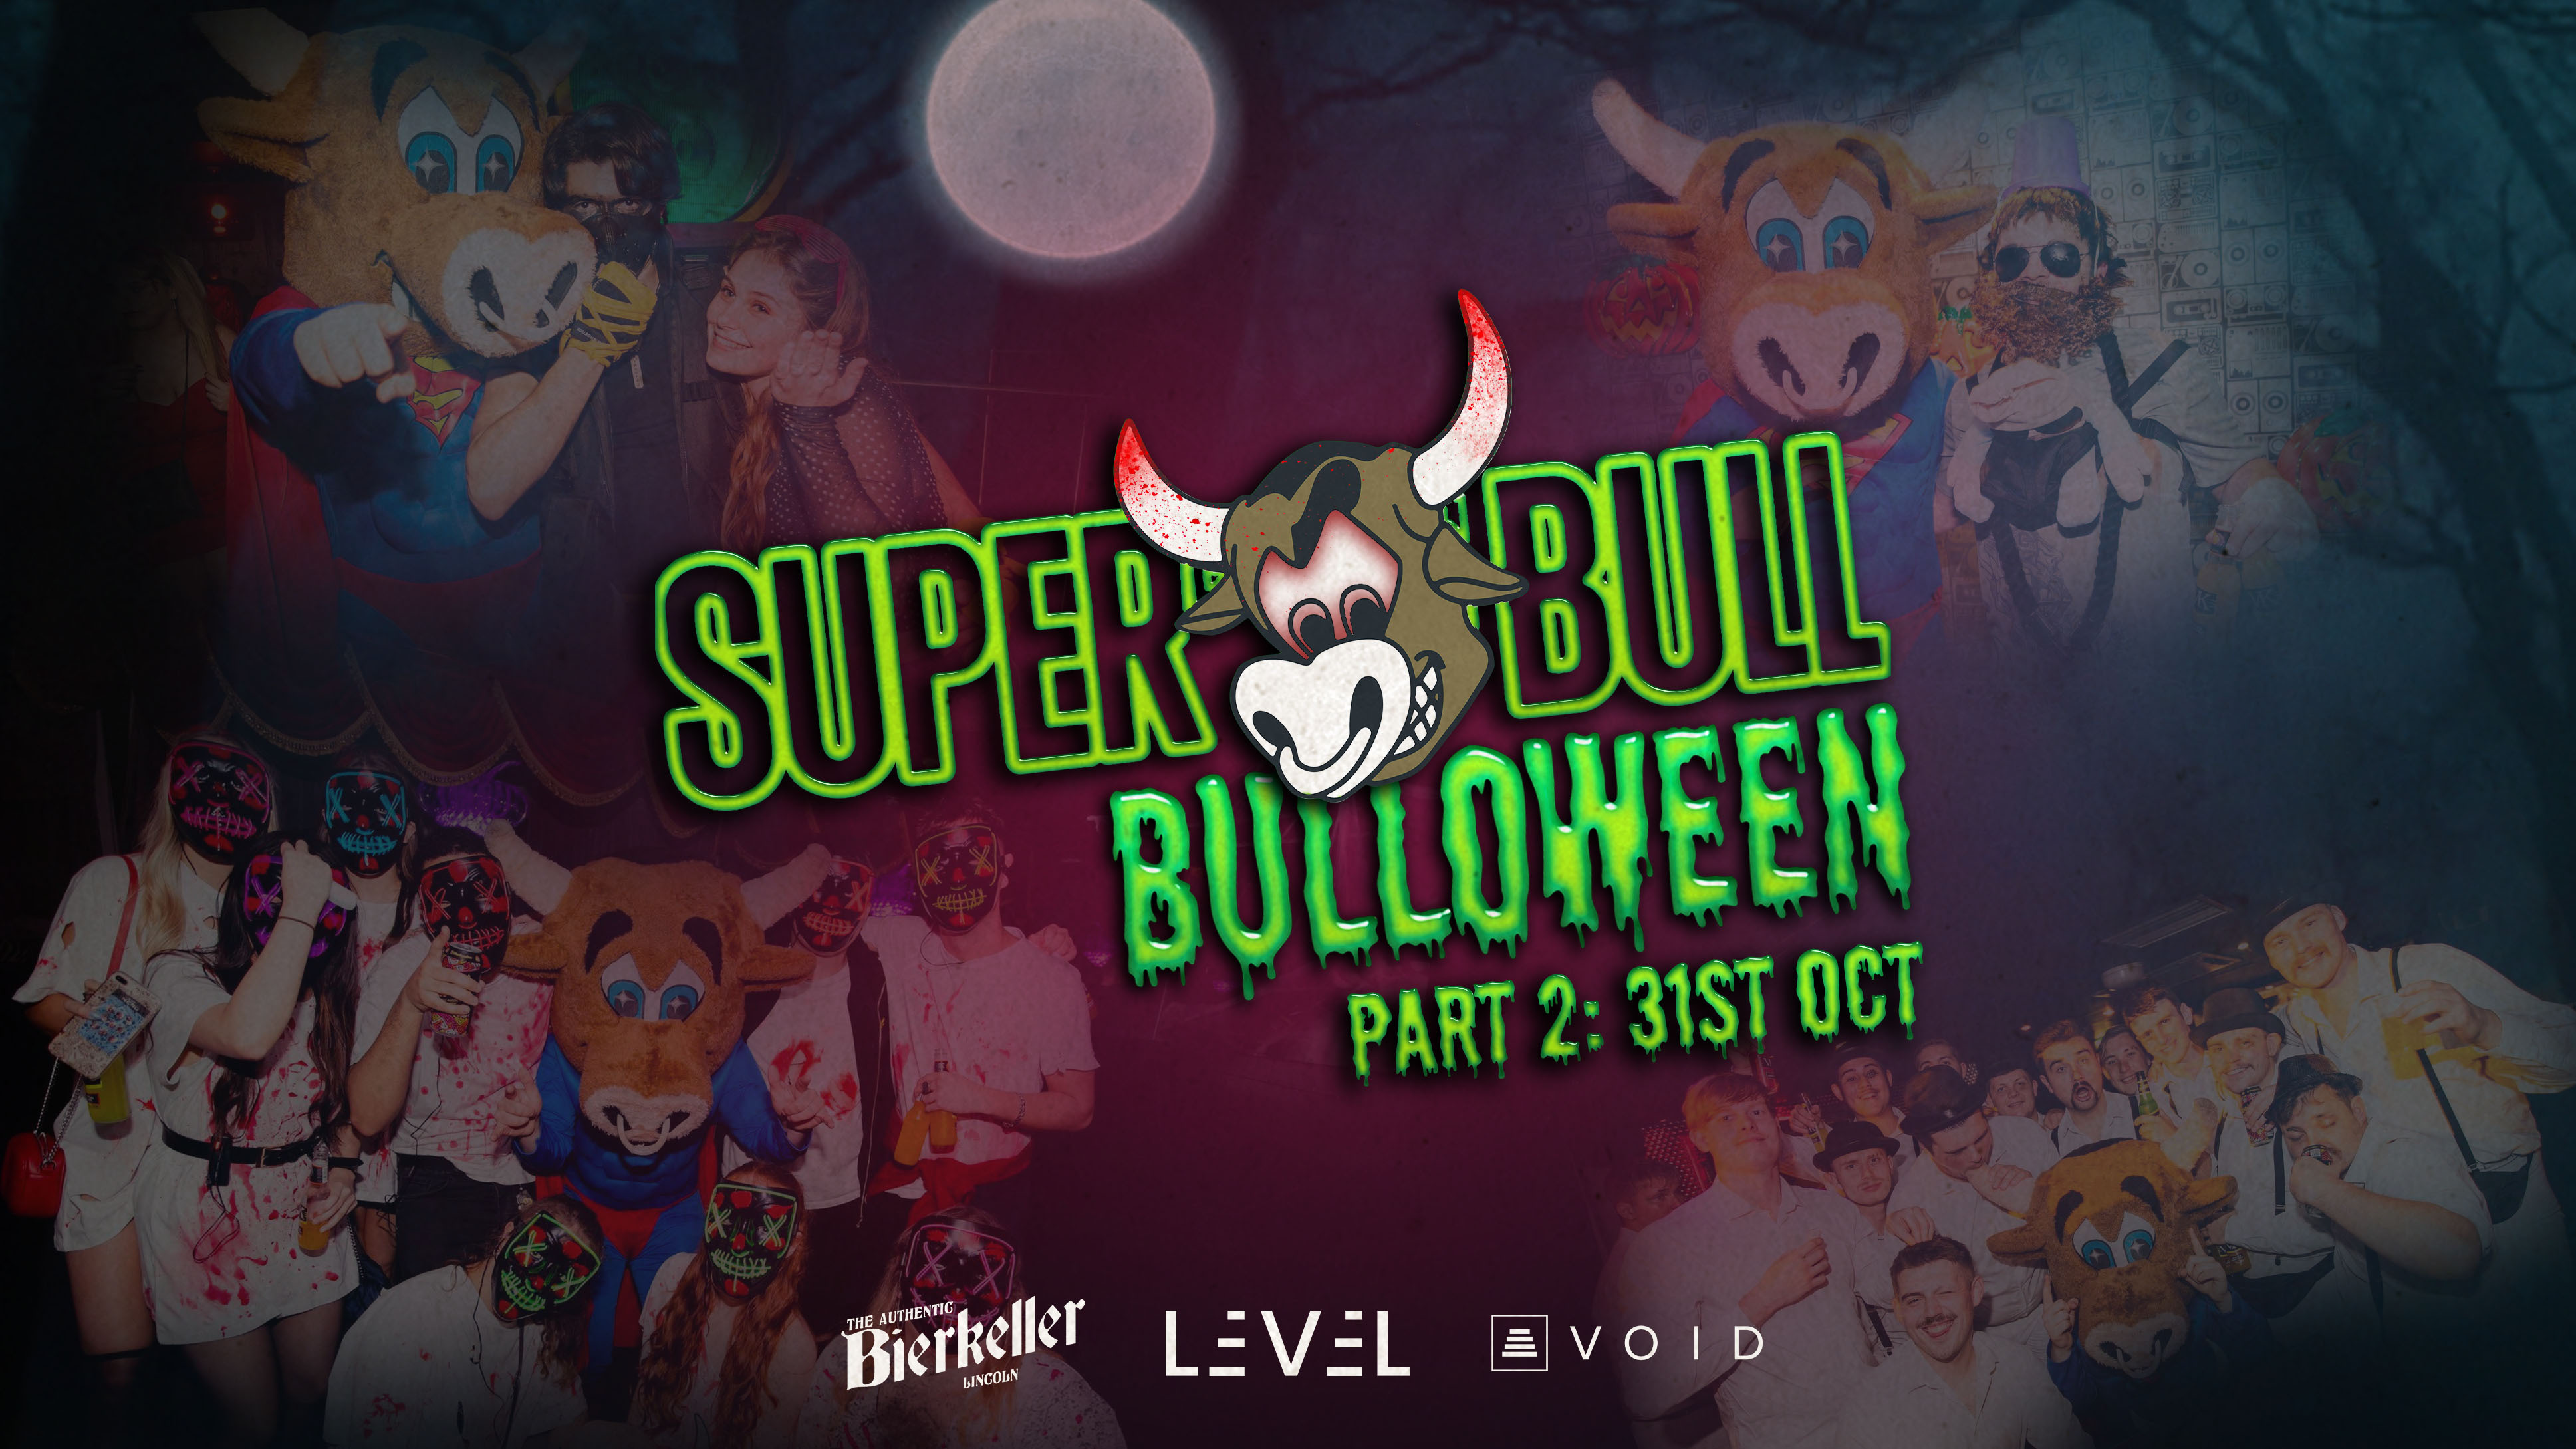 THE SUPERBULL PRESENTS BULLOWEEN PART 2 – SPACES OTD FROM 10PM